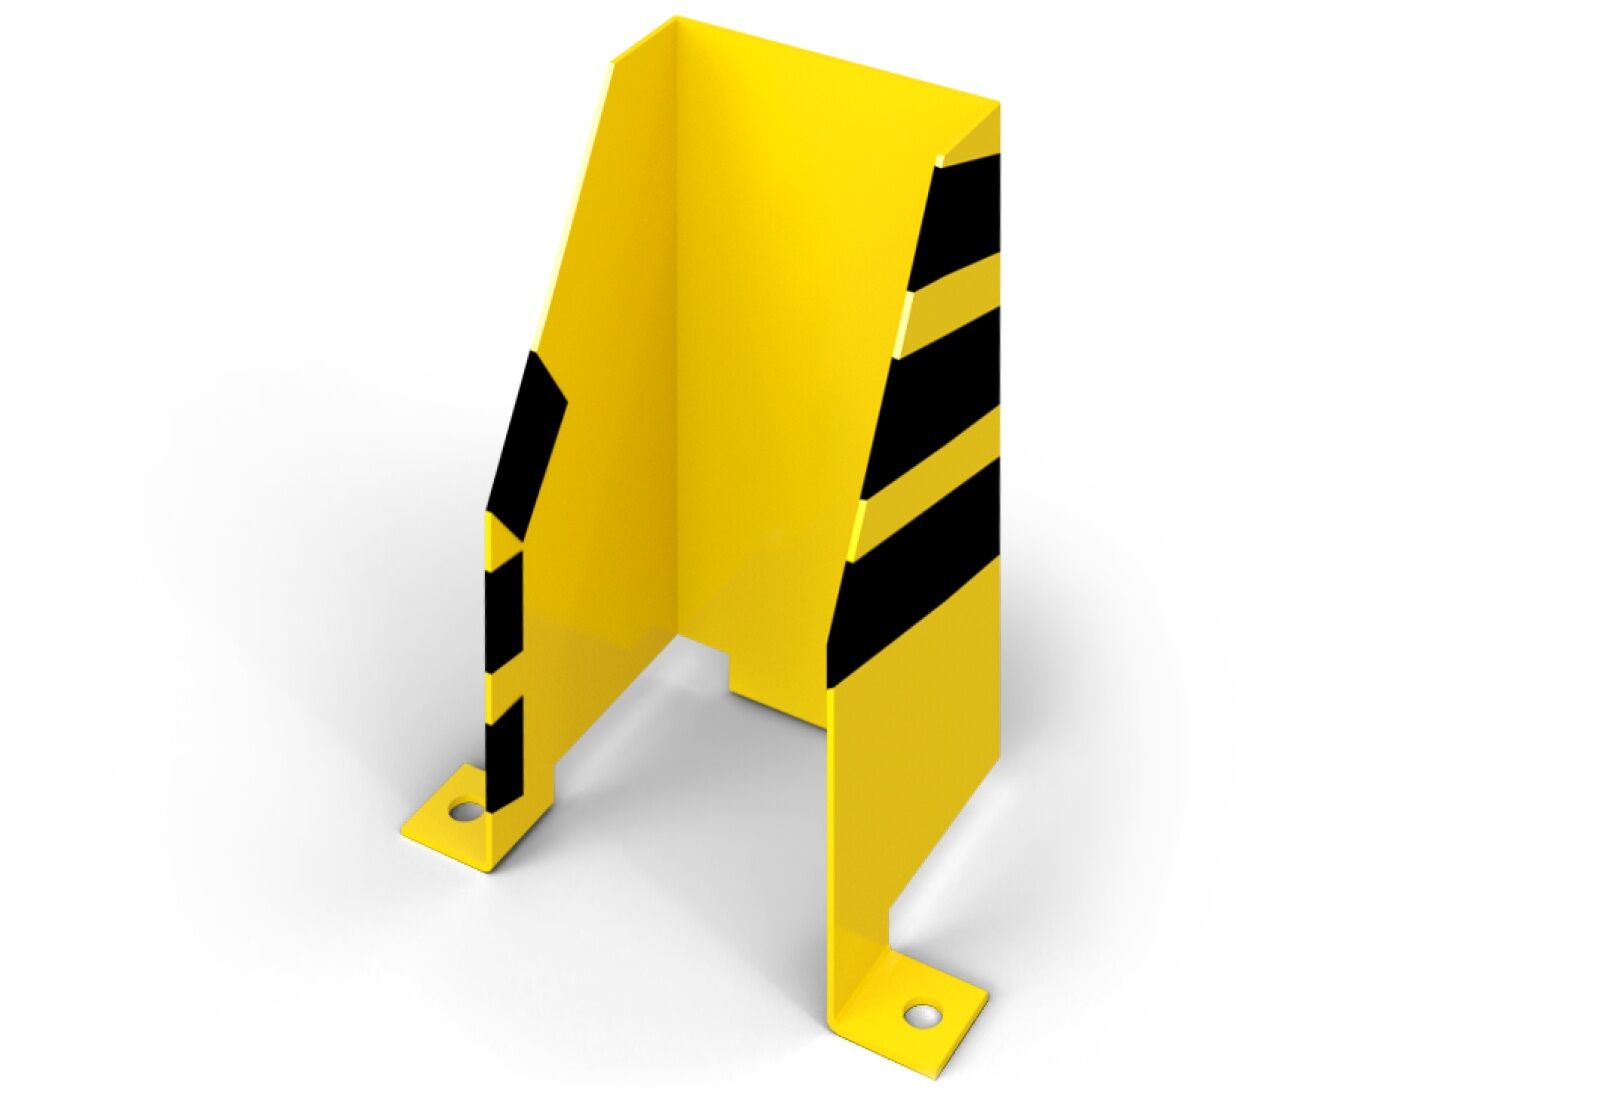 TOPREGAL 2382 U-profile Crash Protection for Pallet rackings, 15.75 in Tall + 4 Bolt Anchors